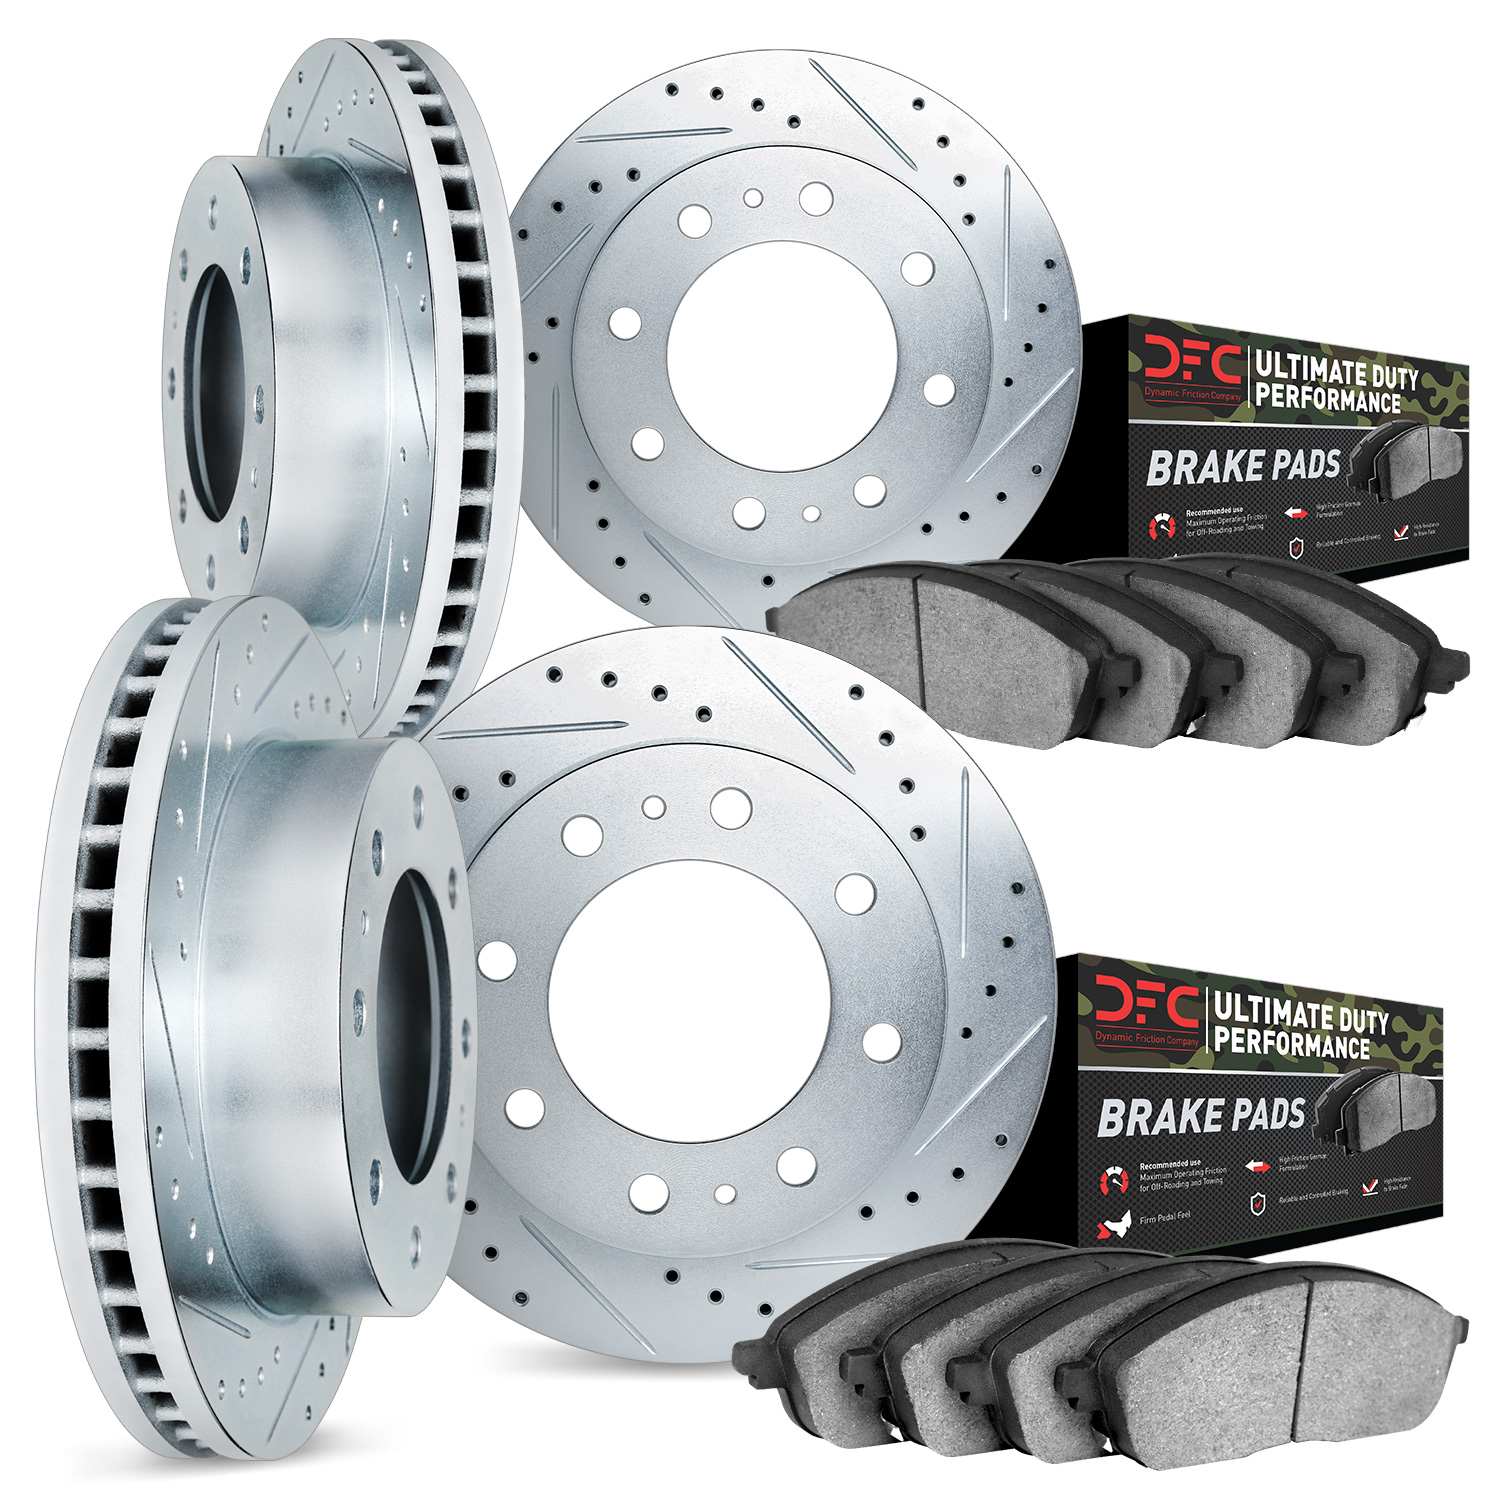 7404-48021 Drilled/Slotted Brake Rotors with Ultimate-Duty Brake Pads Kit [Silver], 2011-2019 GM, Position: Front and Rear